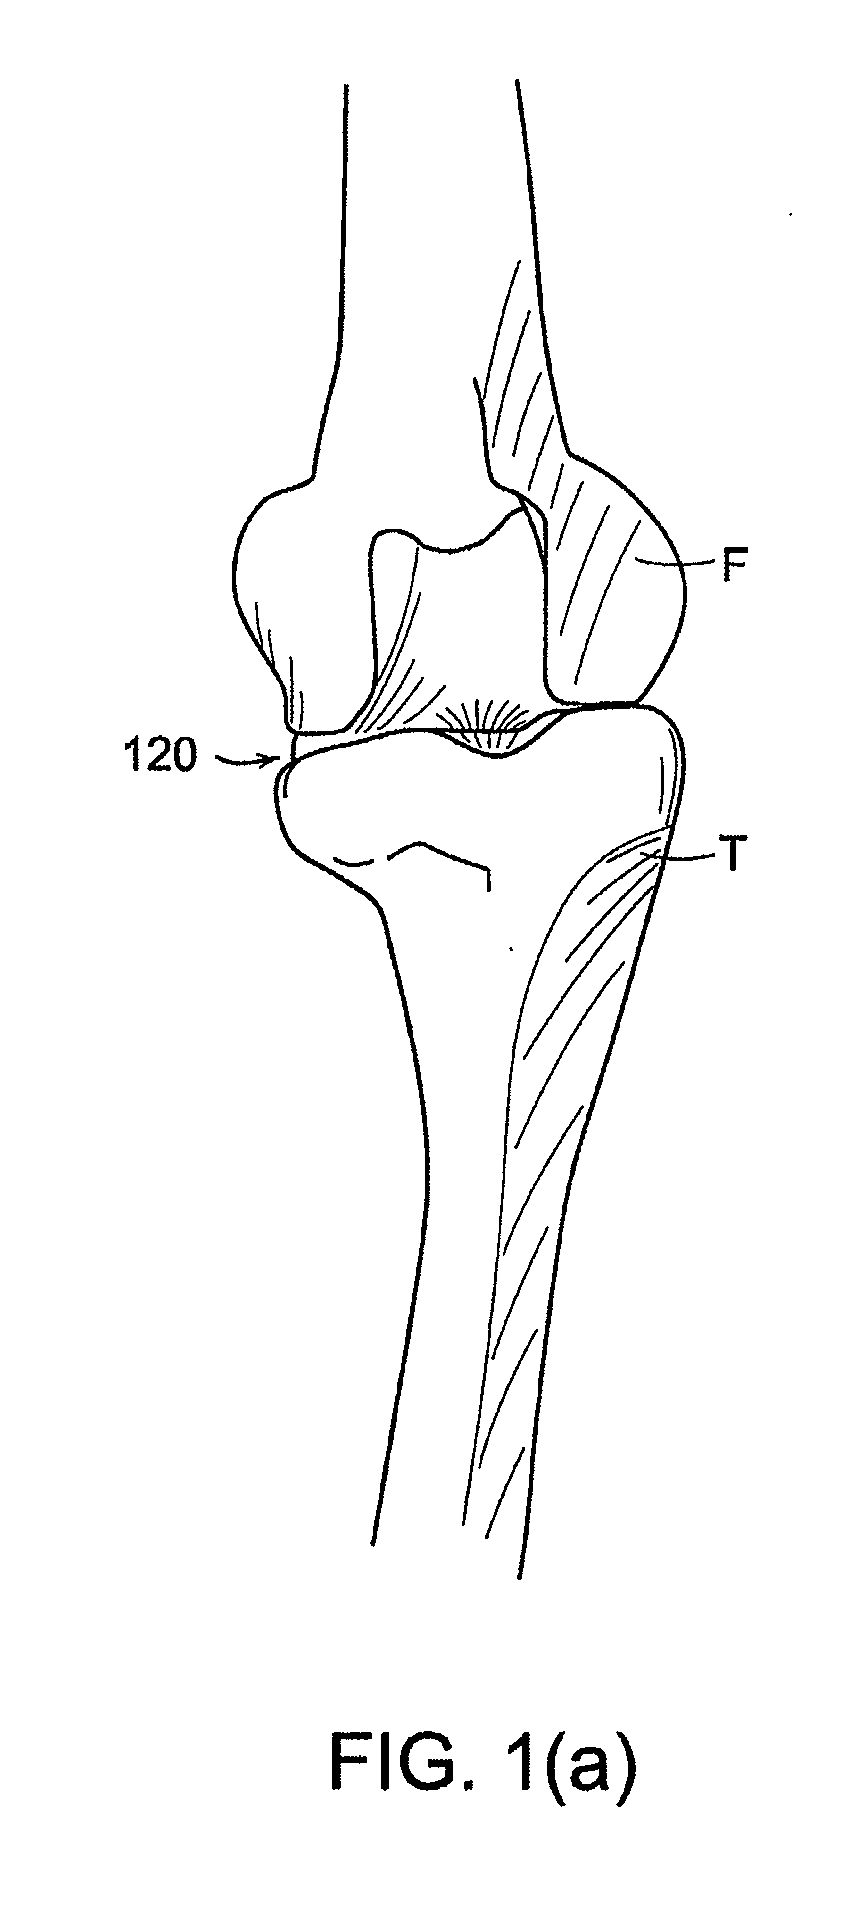 Implant Planning Using Captured Joint Motion Information